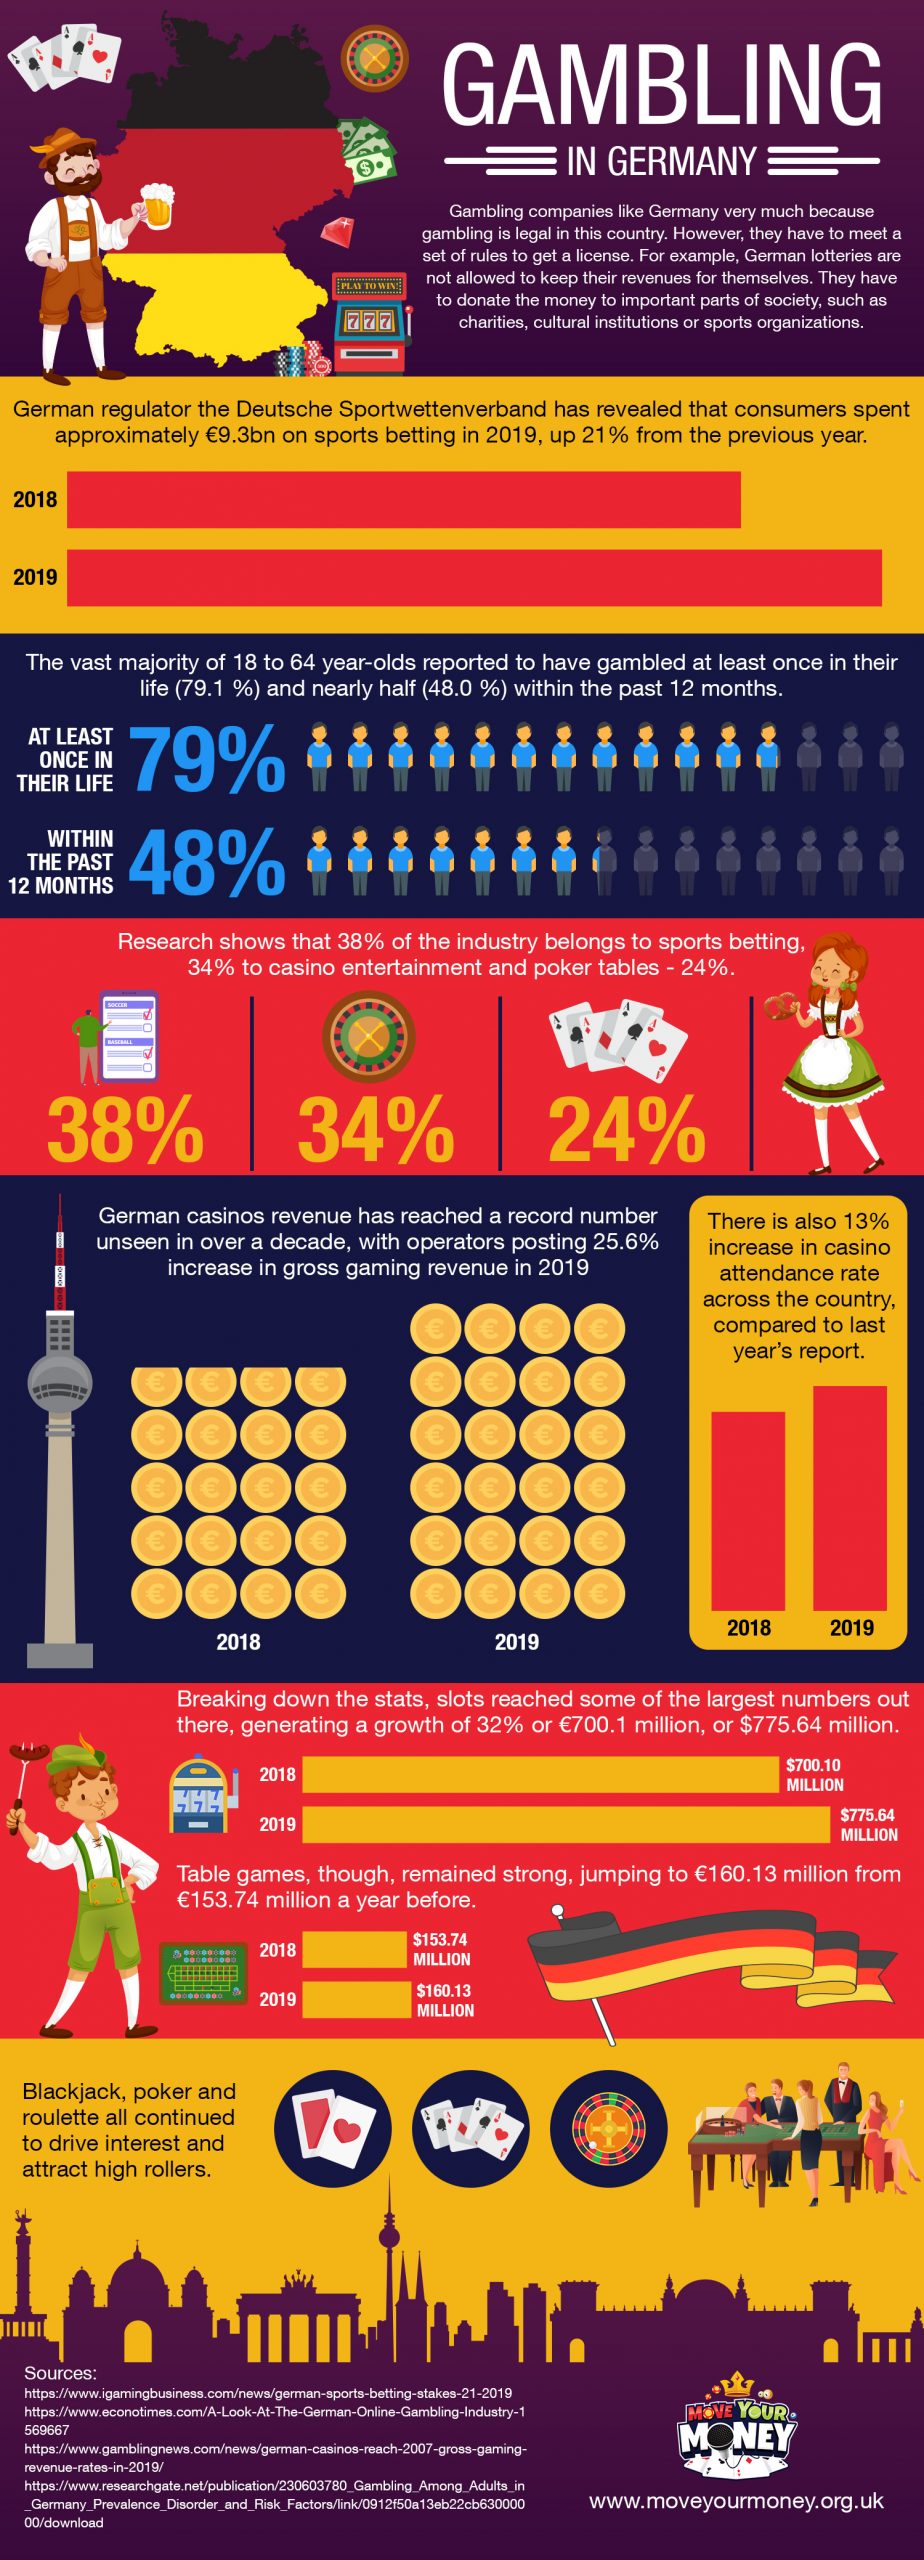 Gambling in Germany Infographic